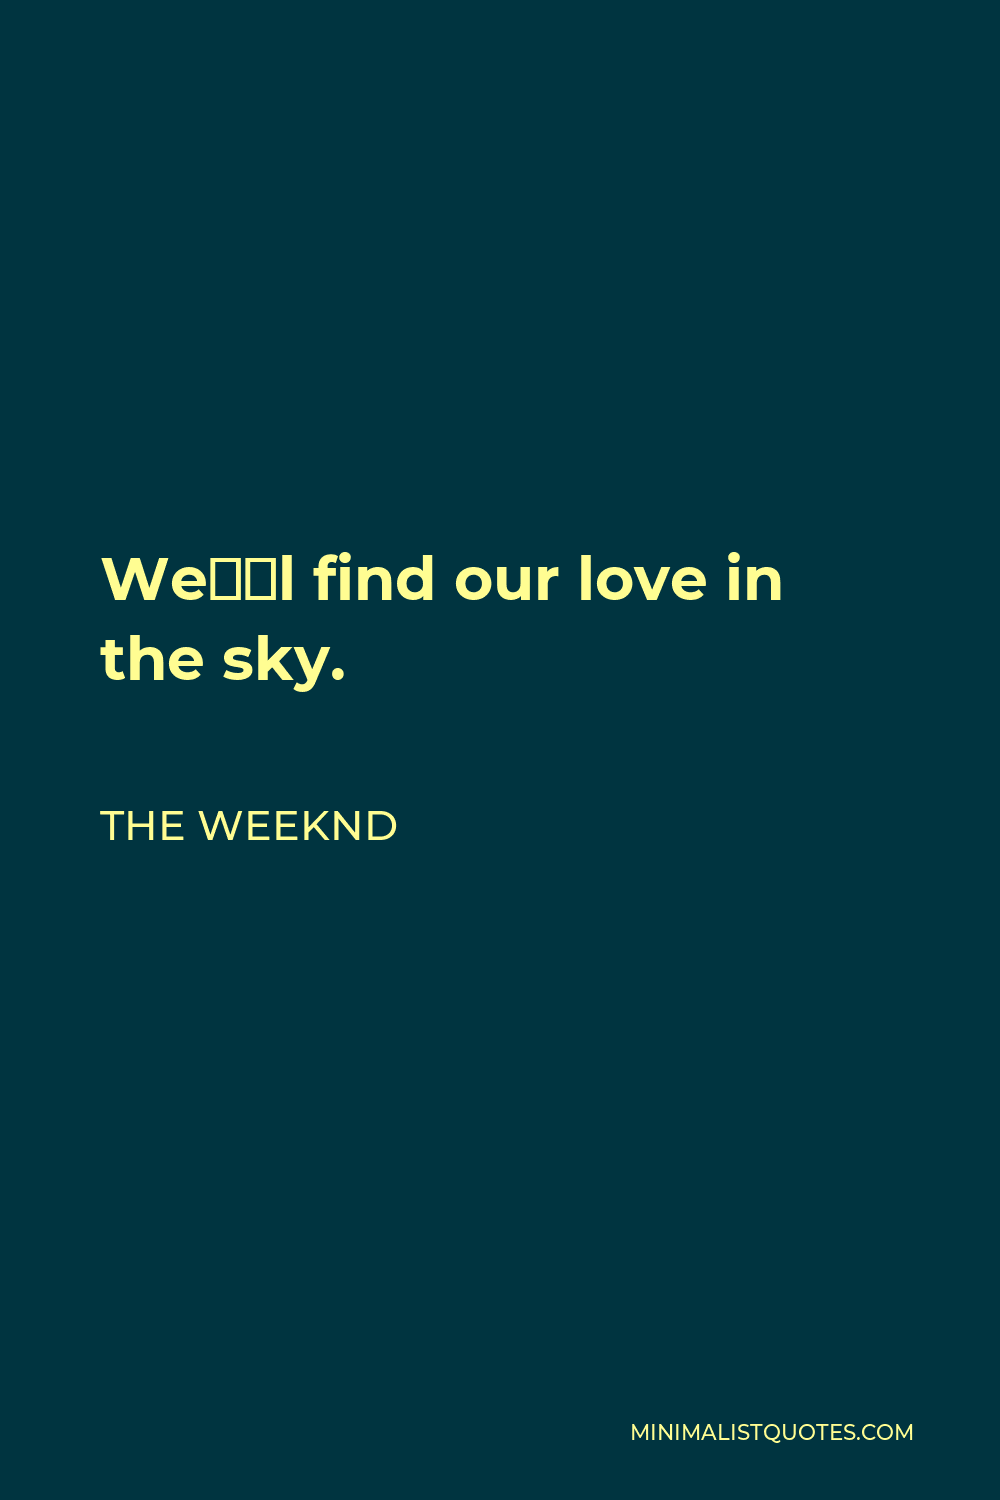 The Weeknd Quote - We’ll find our love in the sky.